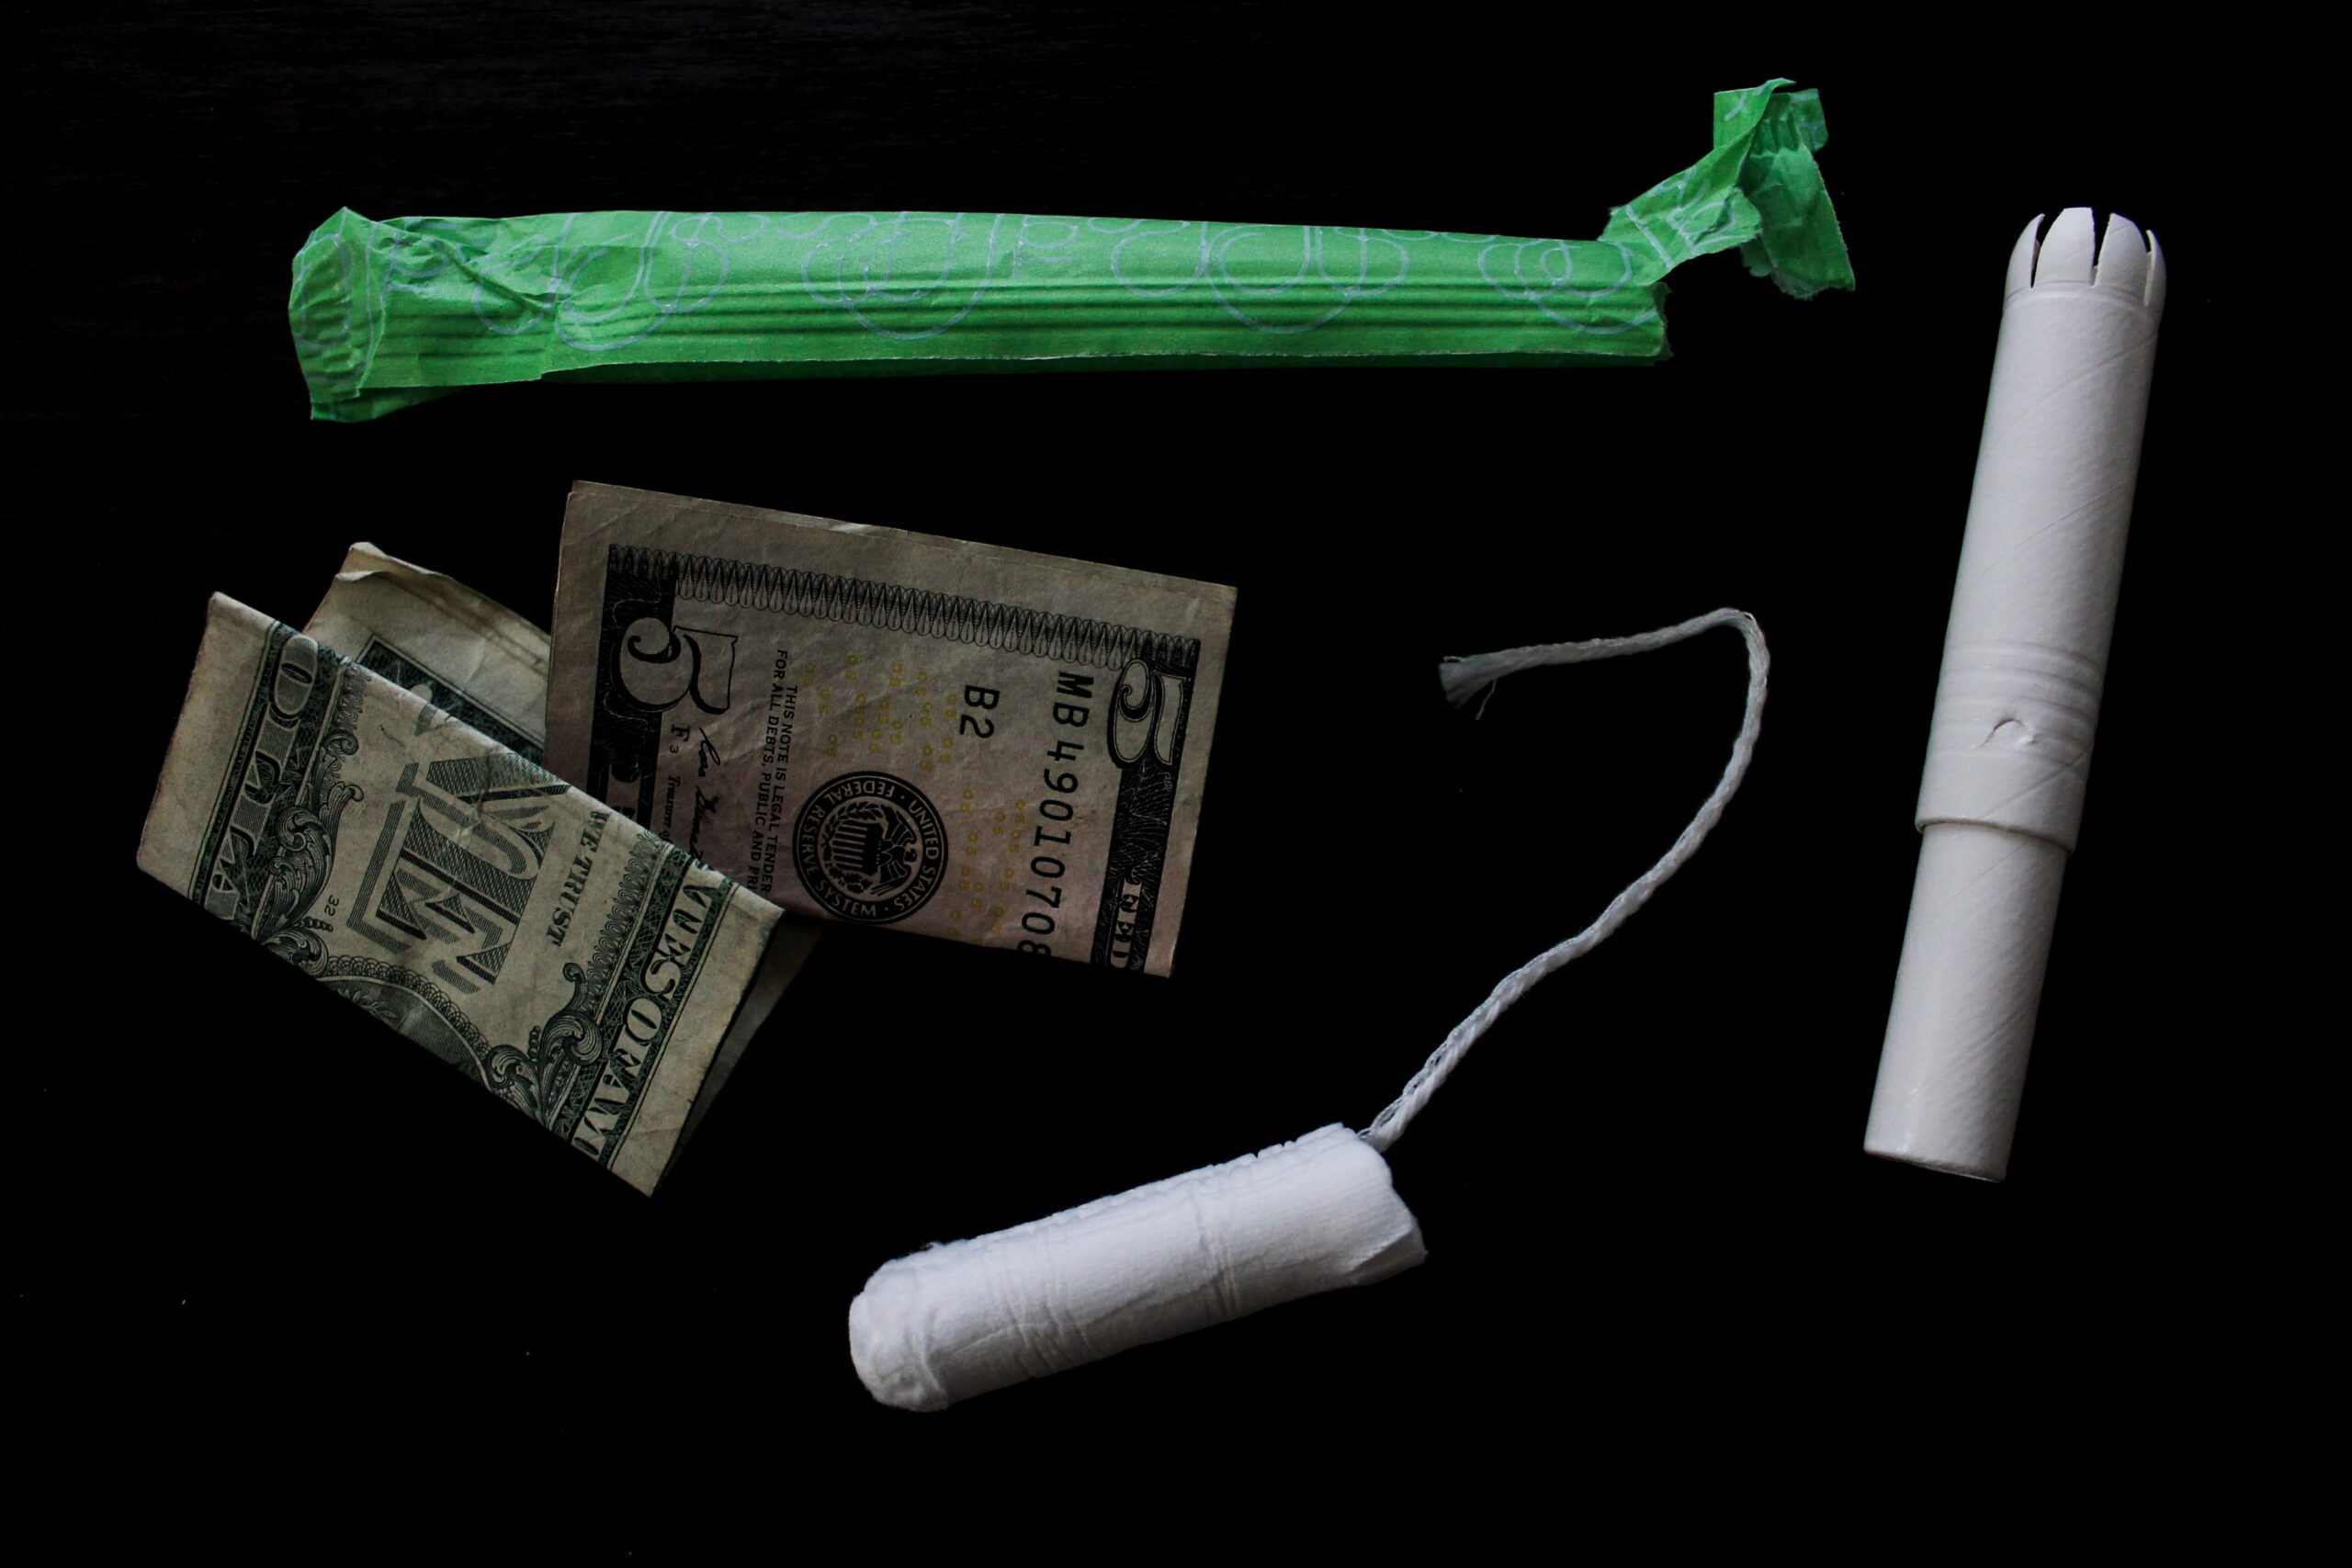 OPINION: USF moves in positive direction by providing students with free menstrual products